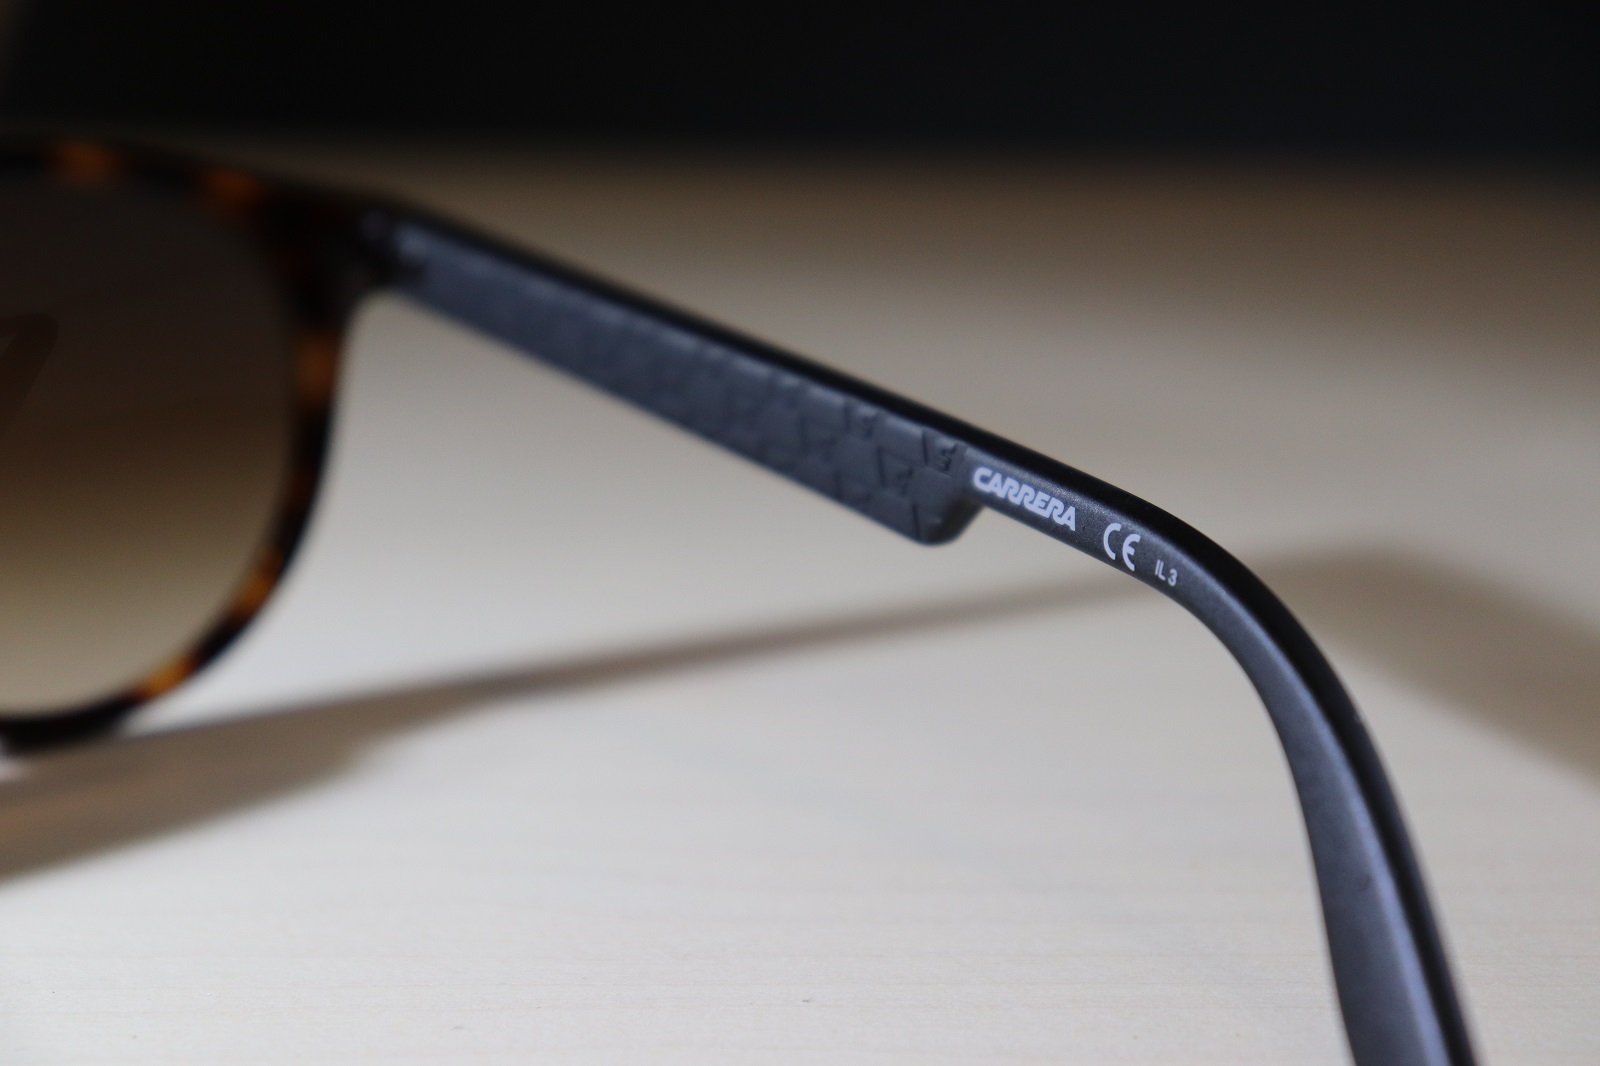 Detect fake Carrera sunglasses - check the case and arms.